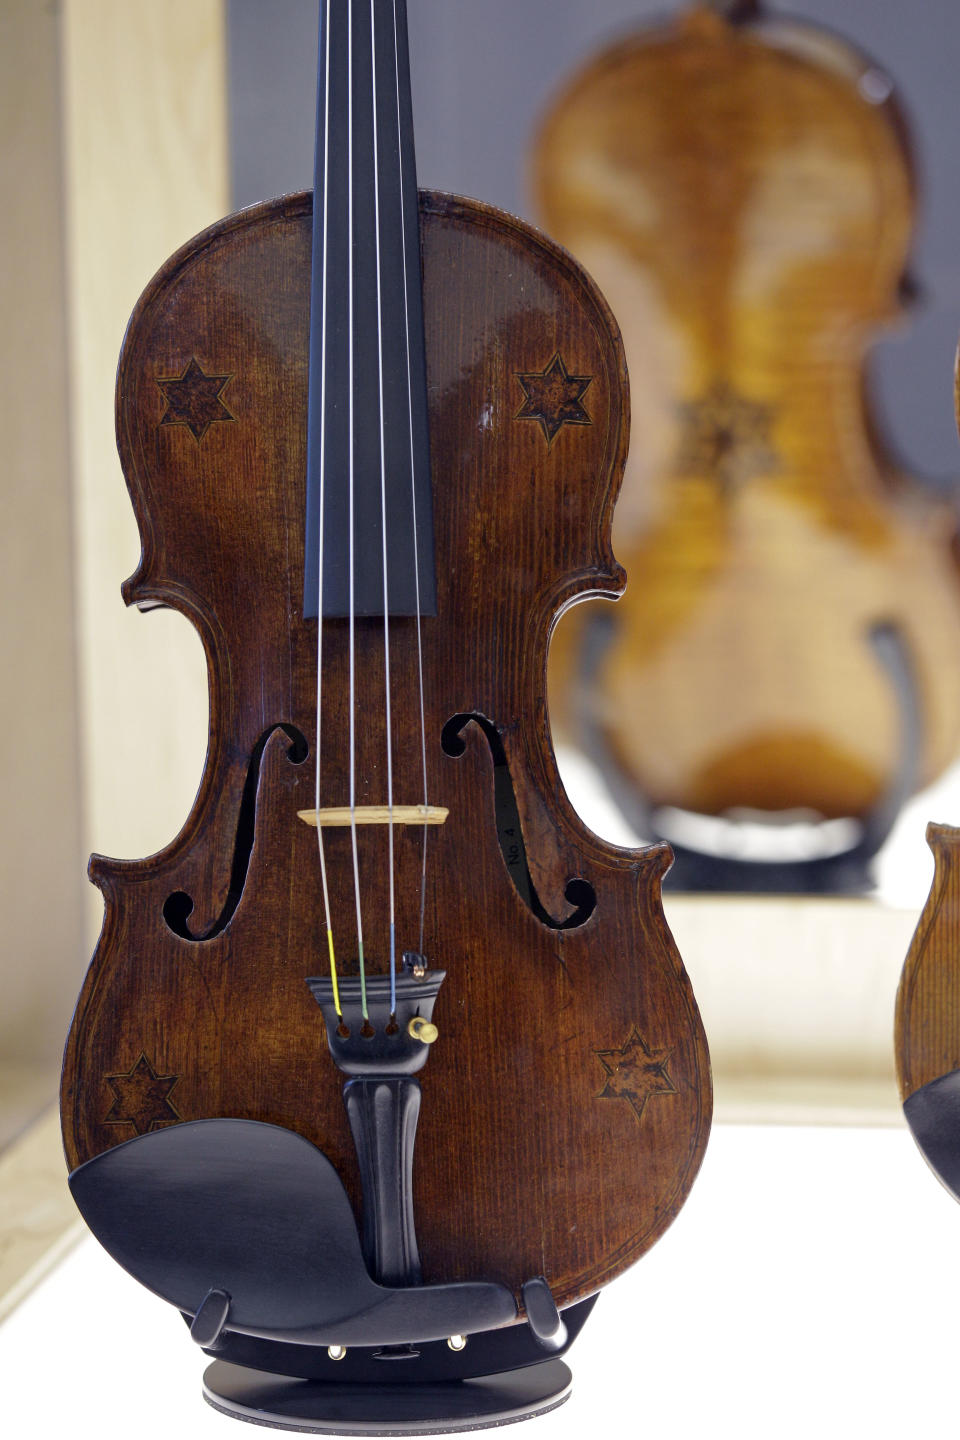 In this April 9, 2012 photo, a violin with five Stars of David is shown on display at the Violins of Hope exhibit at the University of North Carolina in Charlotte, N.C. Eighteen violins recovered from the Holocaust and restored by Israeli violin maker Amnon Weinsten make their U.S. debut on Sunday, April 15. Some were played by Jewish prisoners in Nazi concentration camps, while others belonged to the Jewish Klezmer musical culture. (AP Photo/Chuck Burton)